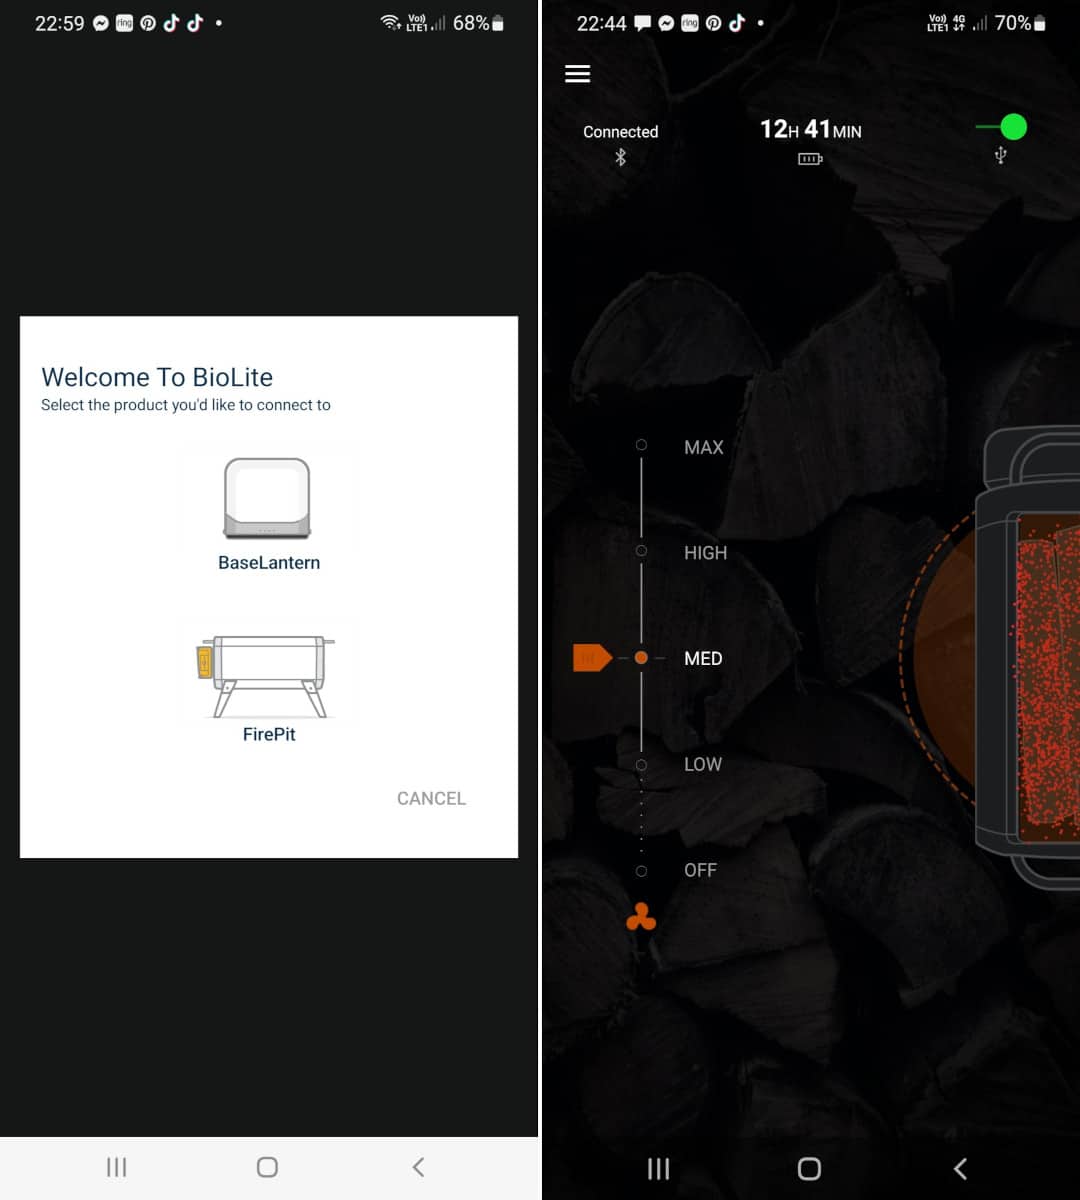 Two BiolIte app screenshots side by side, showing welcome screen, and speed setting with battery life remaining